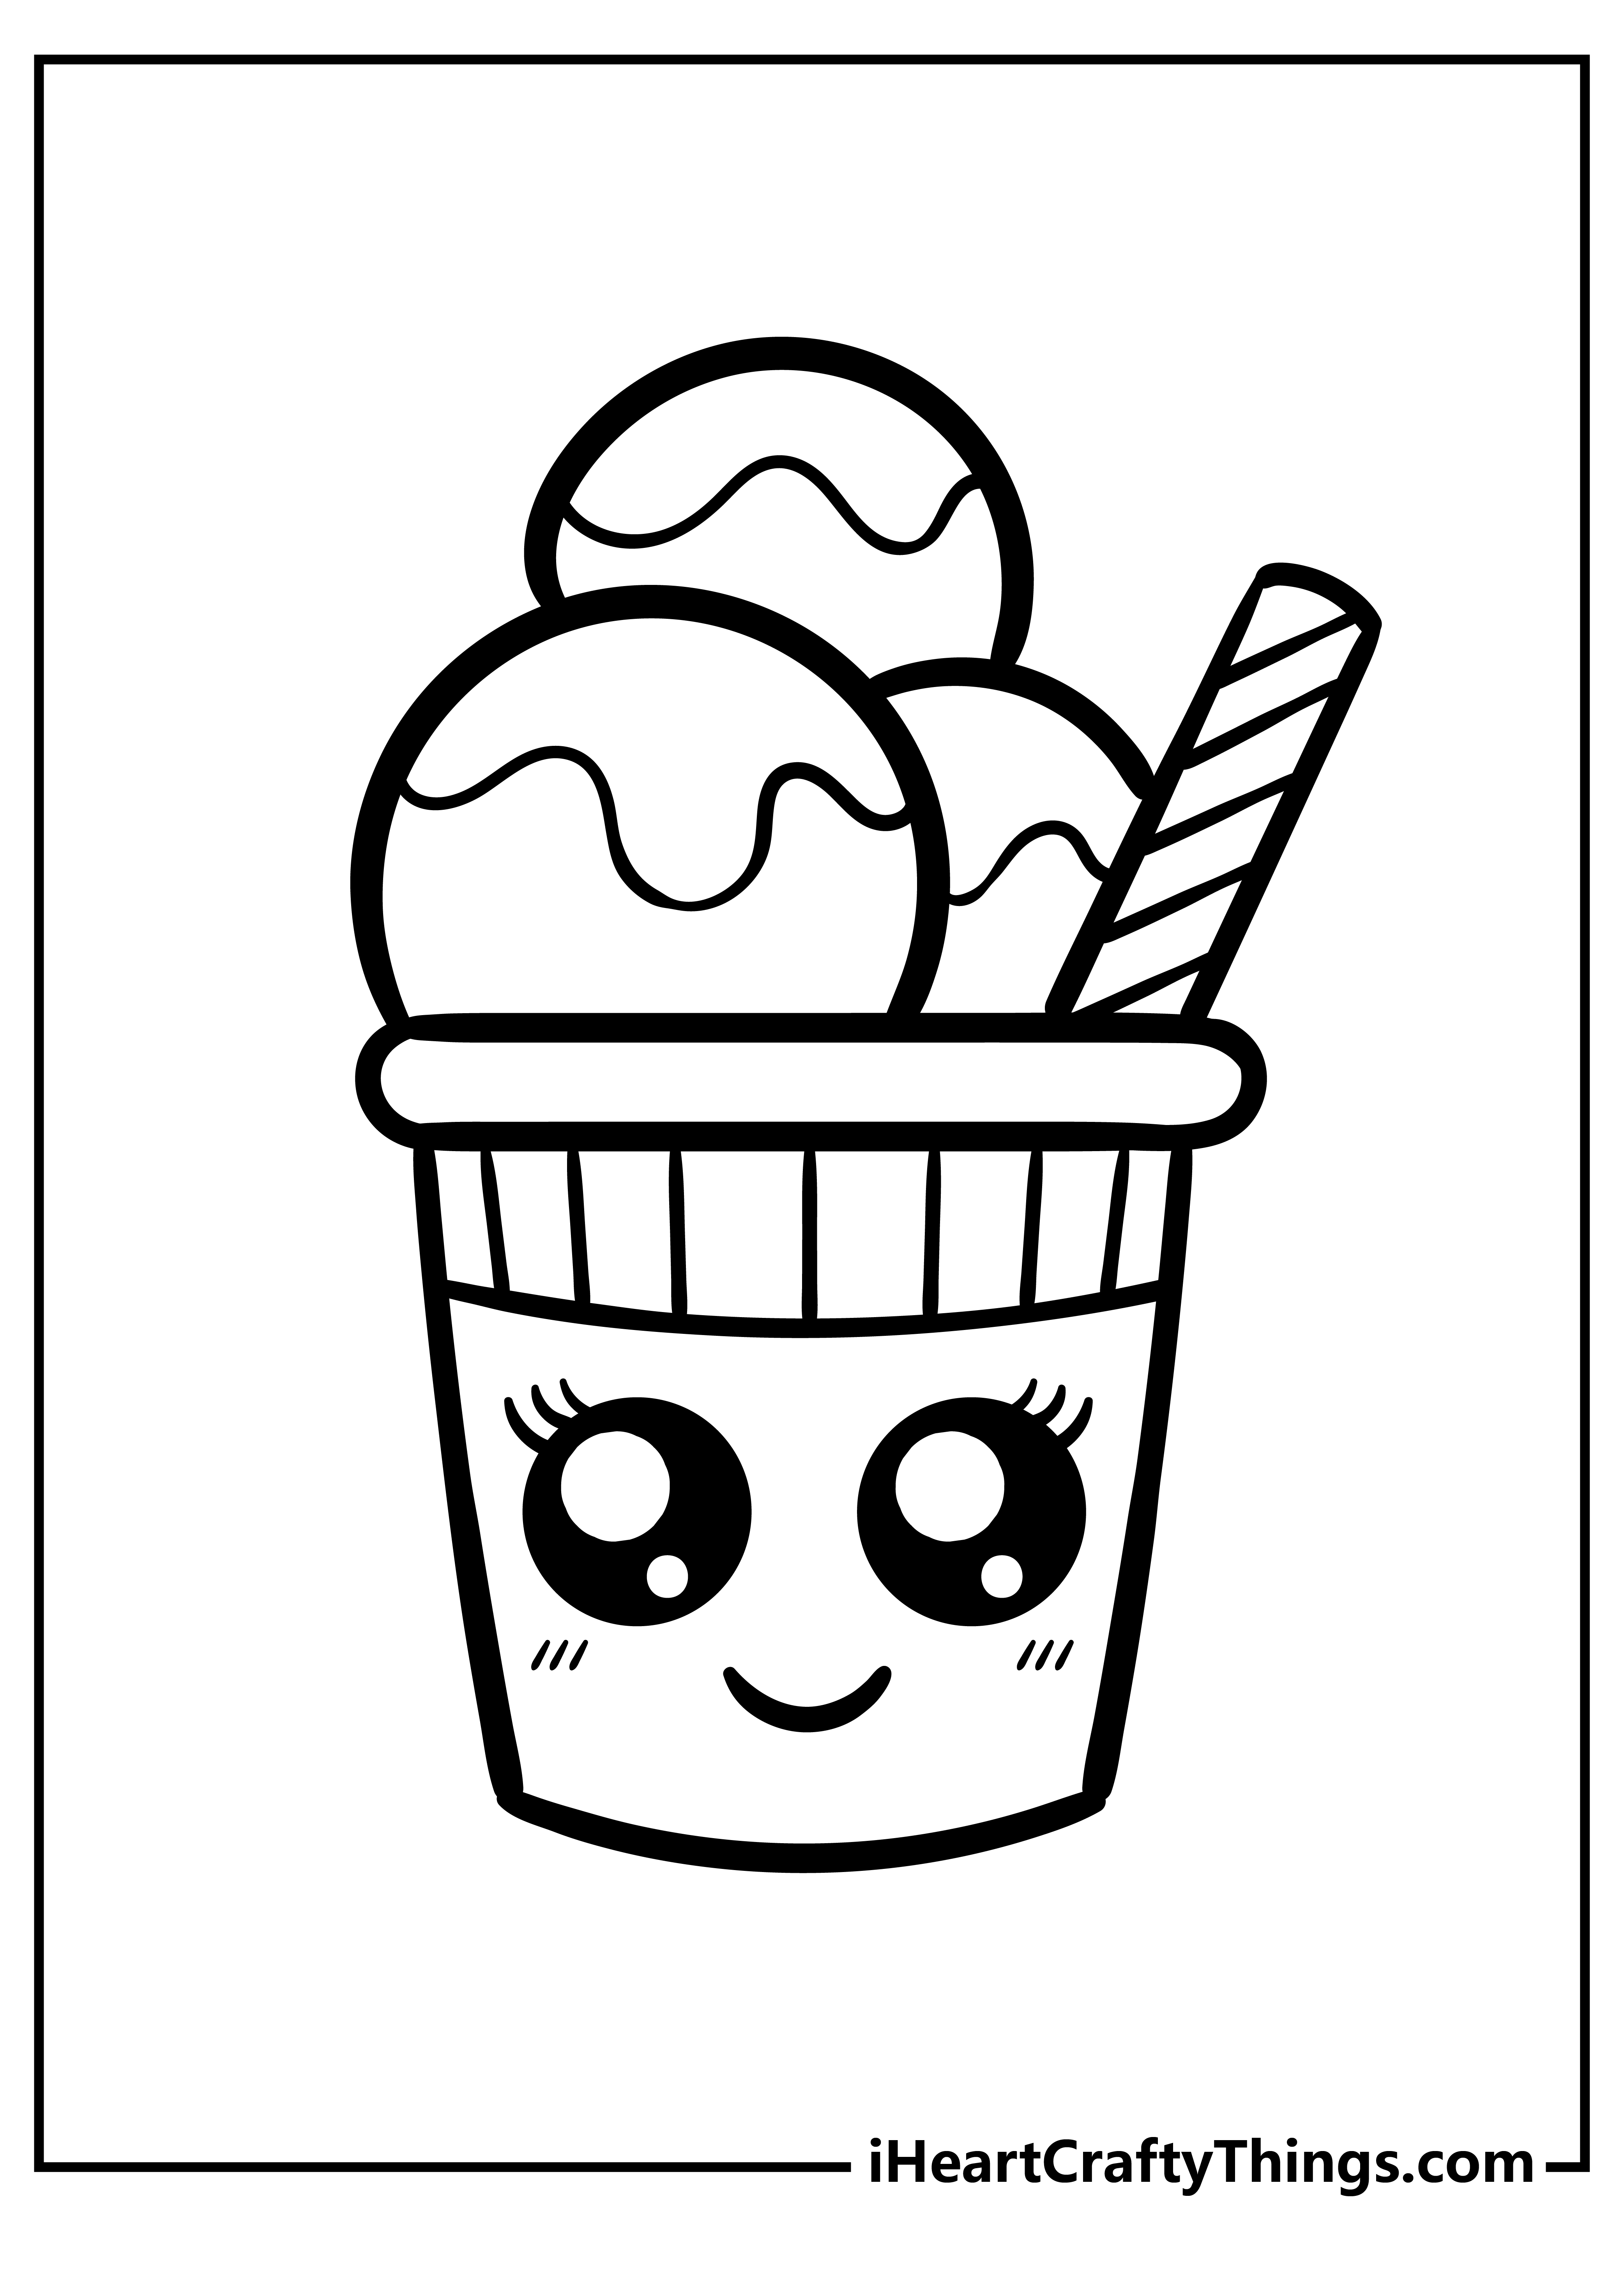 Free Yummy Food Coloring Pages and ...